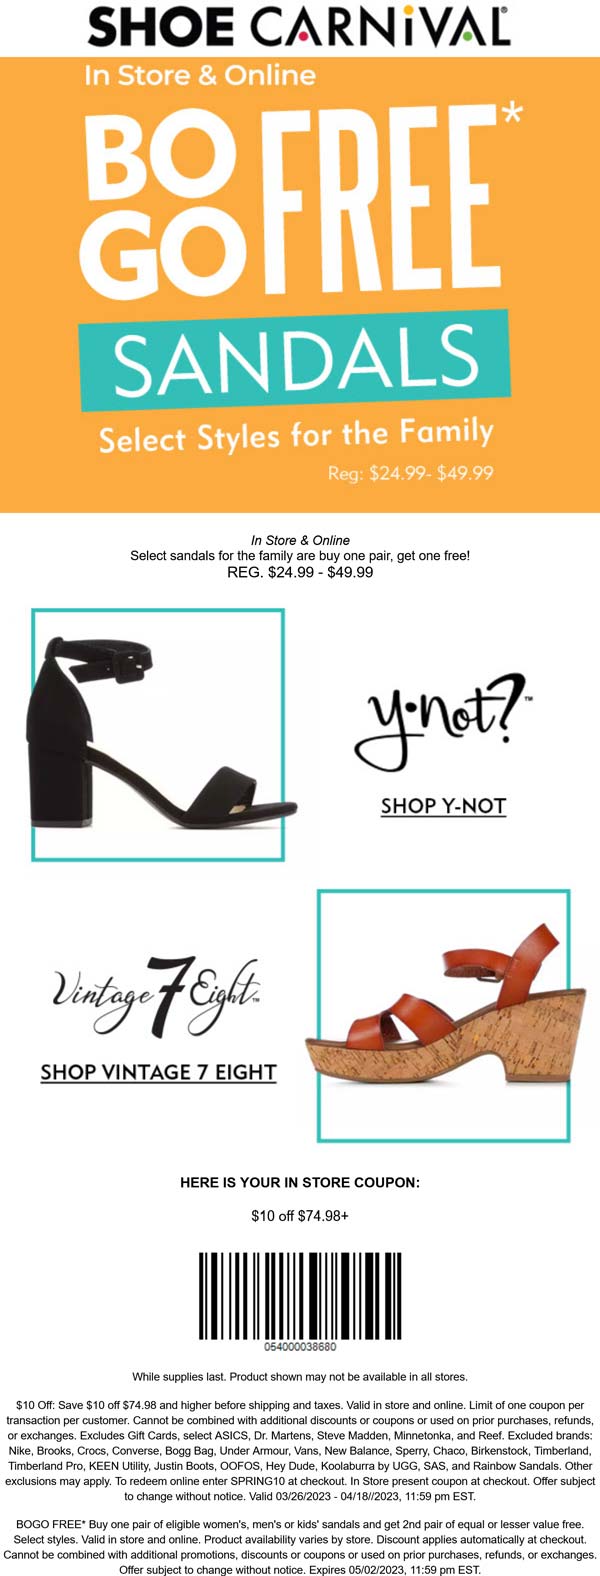 Shoe Carnival stores Coupon  $10 off $75 + second sandals free at Shoe Carnival, or online via promo code SPRING10 #shoecarnival 